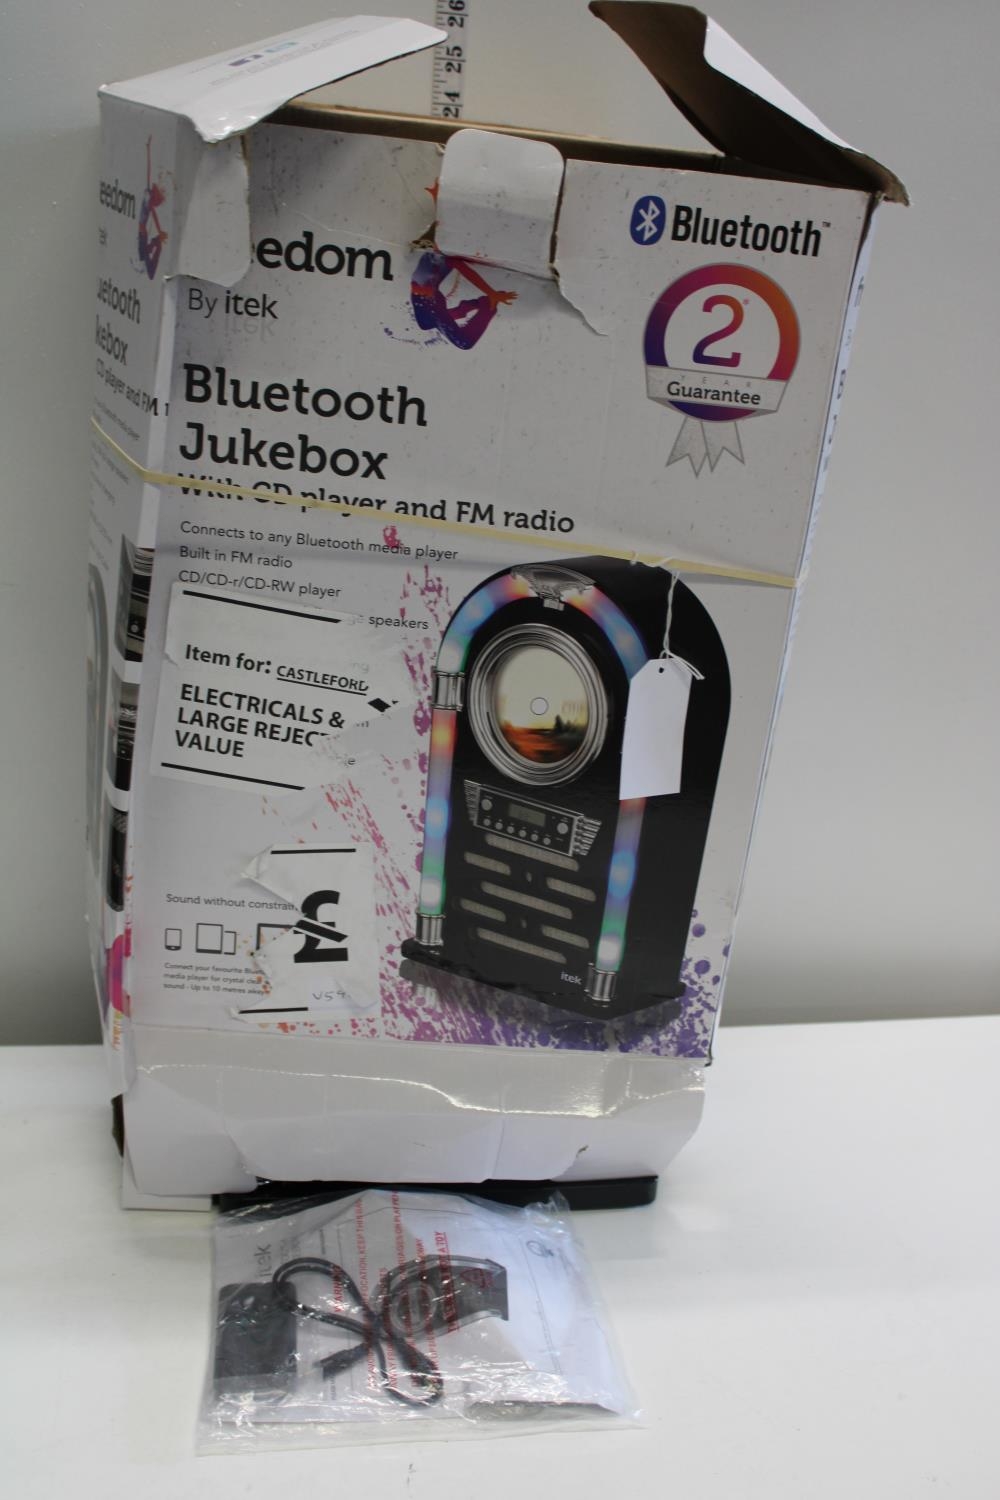 A boxed blue tooth jukebox